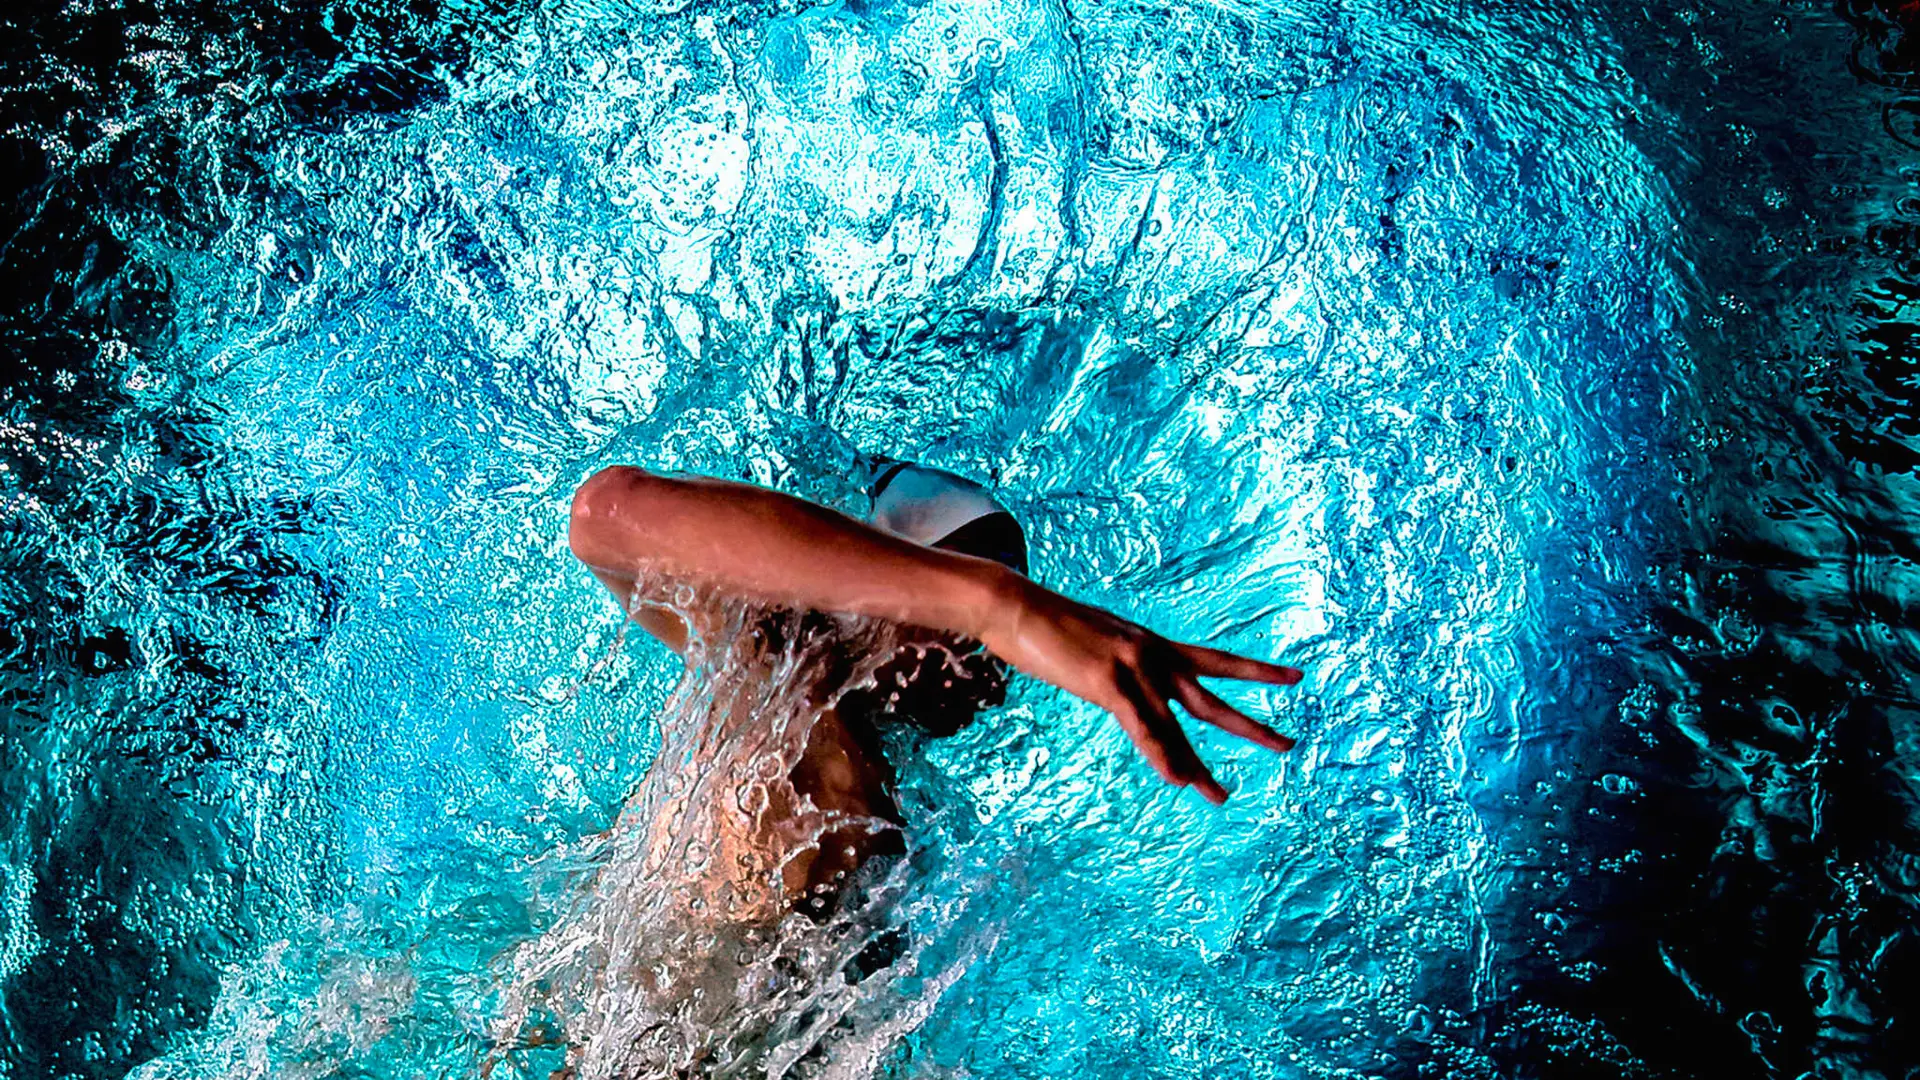 Italian Spring National Swimming Championships
Anna Pirovano, belonging to the team of Vittoria Alata Nuoto from Brescia, is competing in the heats of the 400 Individual Medley. 
When turning in the Breaststroke leg of the medley, the athletes have to touch with two hands the wall, not allowing the somersault turn and forcing the swimmer to bend to one side.
Photo Giorgio Scala/Deepbluemedia
Campionati Italiani Assoluti Nuoto Primaverili
Riccione  Italy 8 - 12/04/2013
Day 03 batterie heats 10 aprile